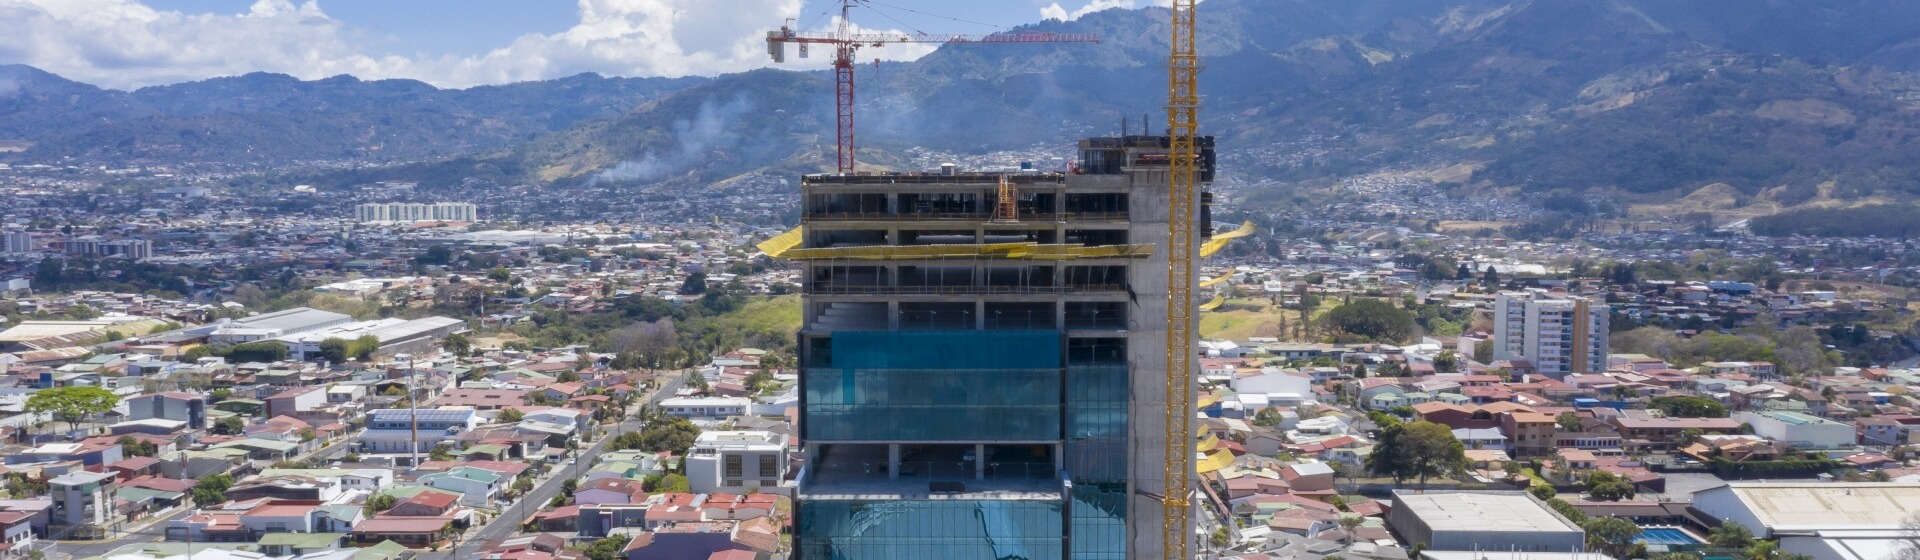 Pair-of-Potain-tower-cranes-erect-one-of-the-most-advanced-buildings-in-Costa-Rica-01.jpg